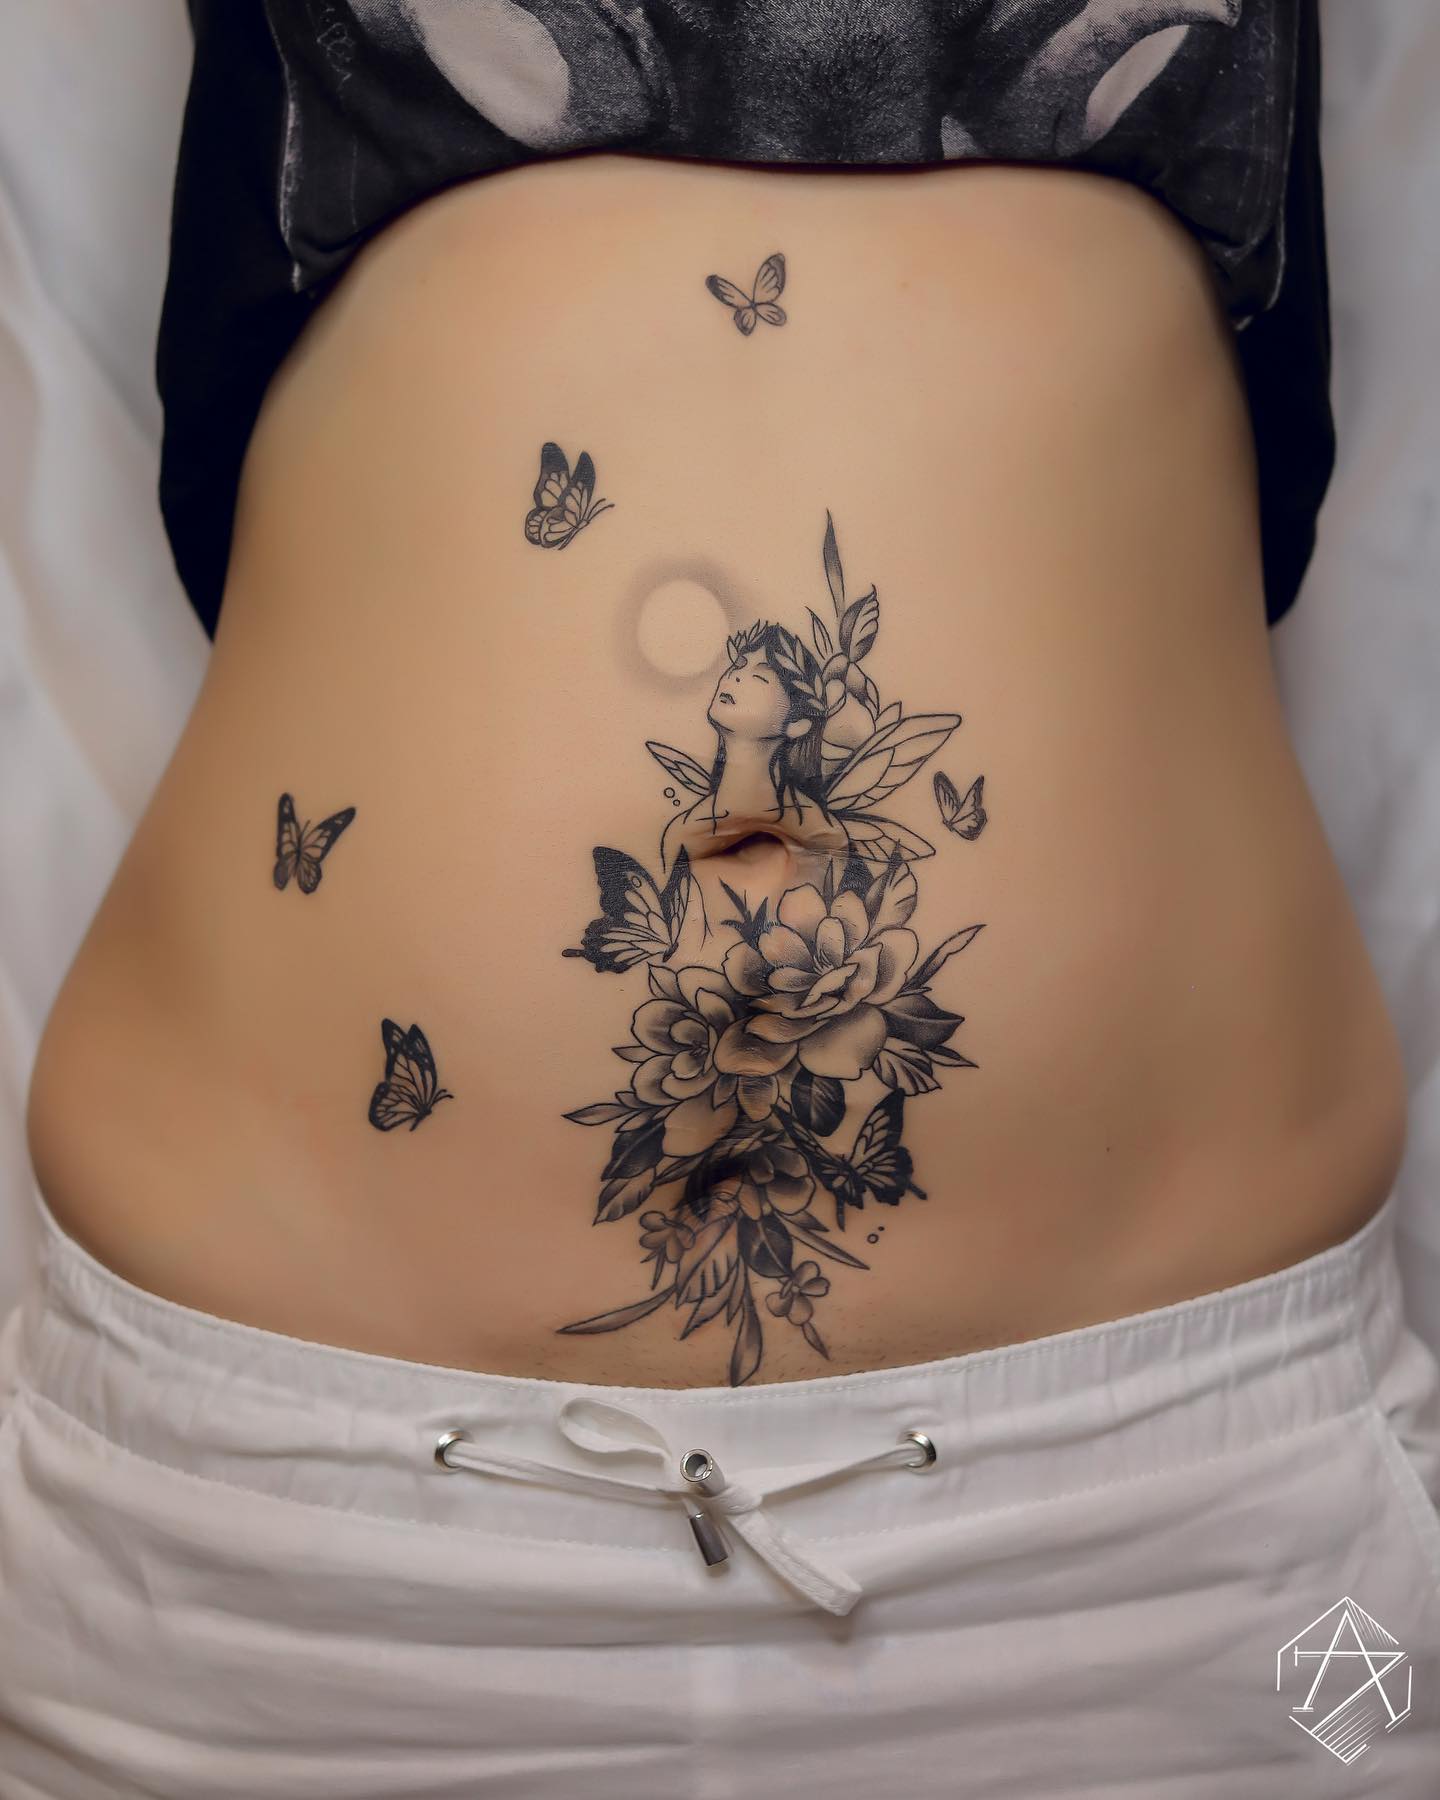 Ethereal Woman with Flowers and Butterflies Tattoo